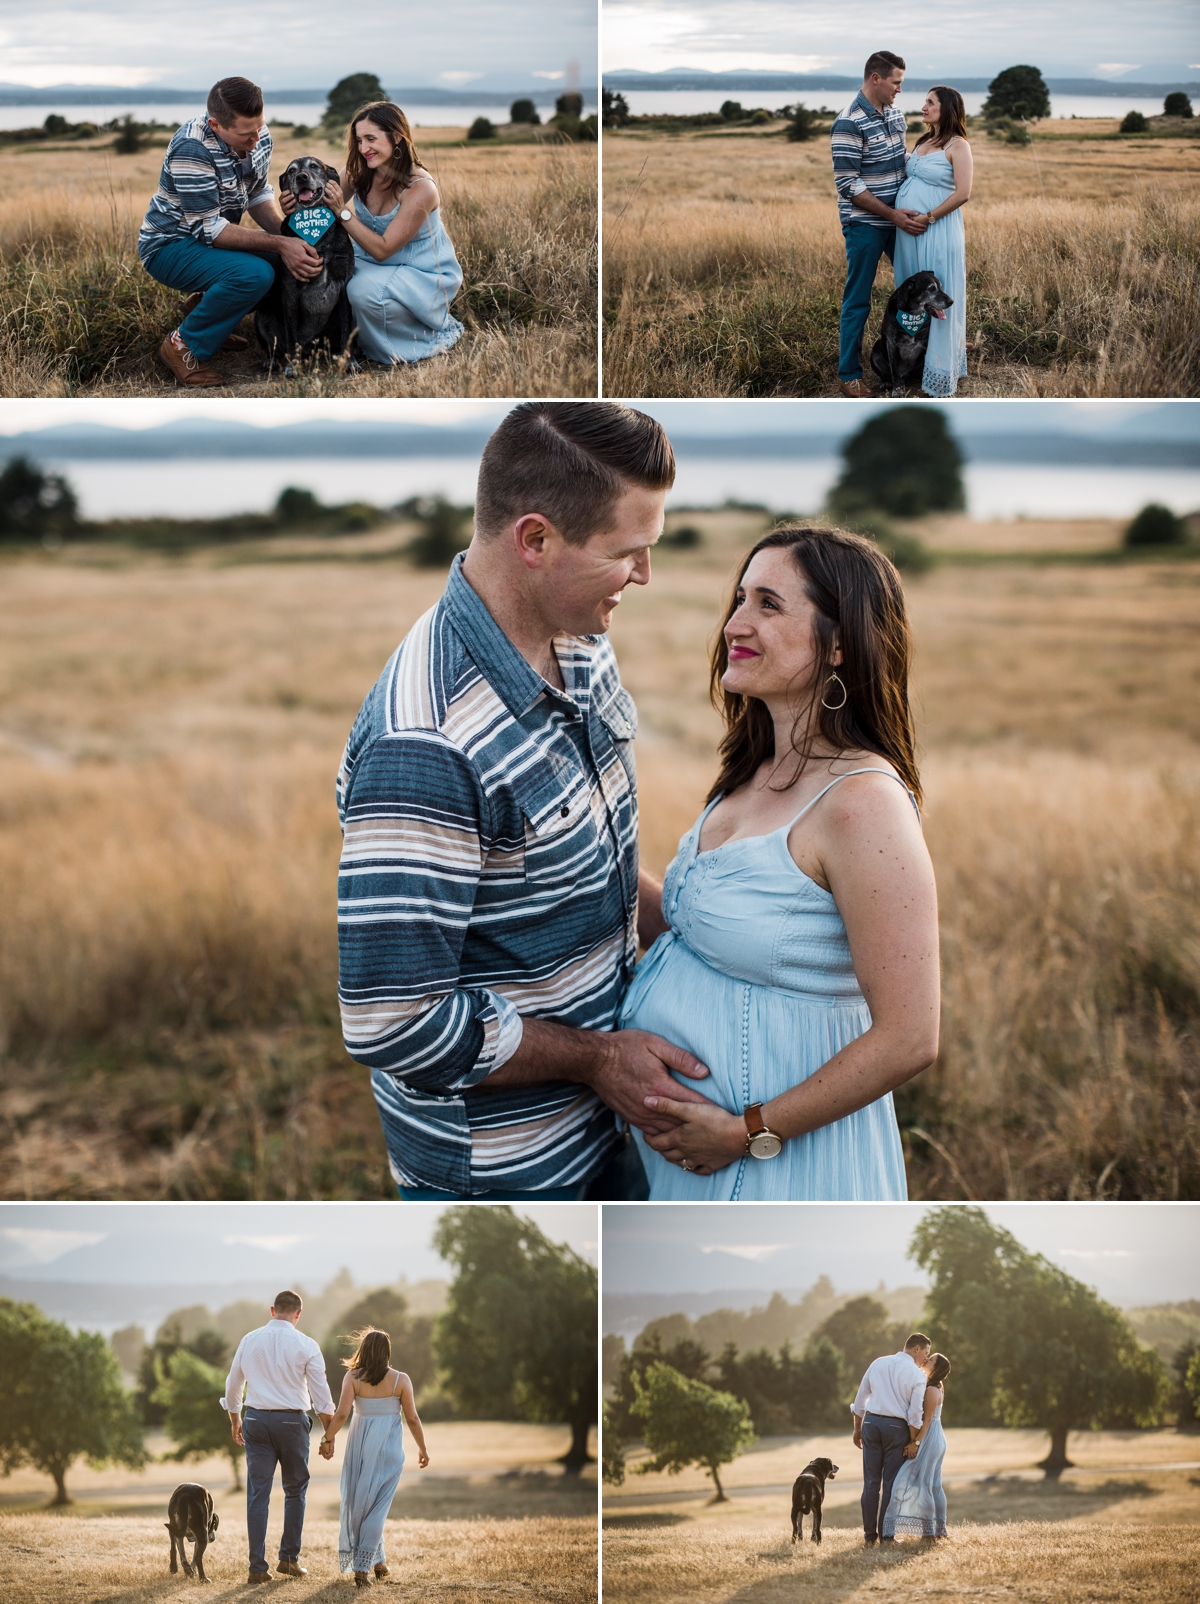 seattle maternity photographer  connected lifestyle maternity photography elena s blair 6.jpg